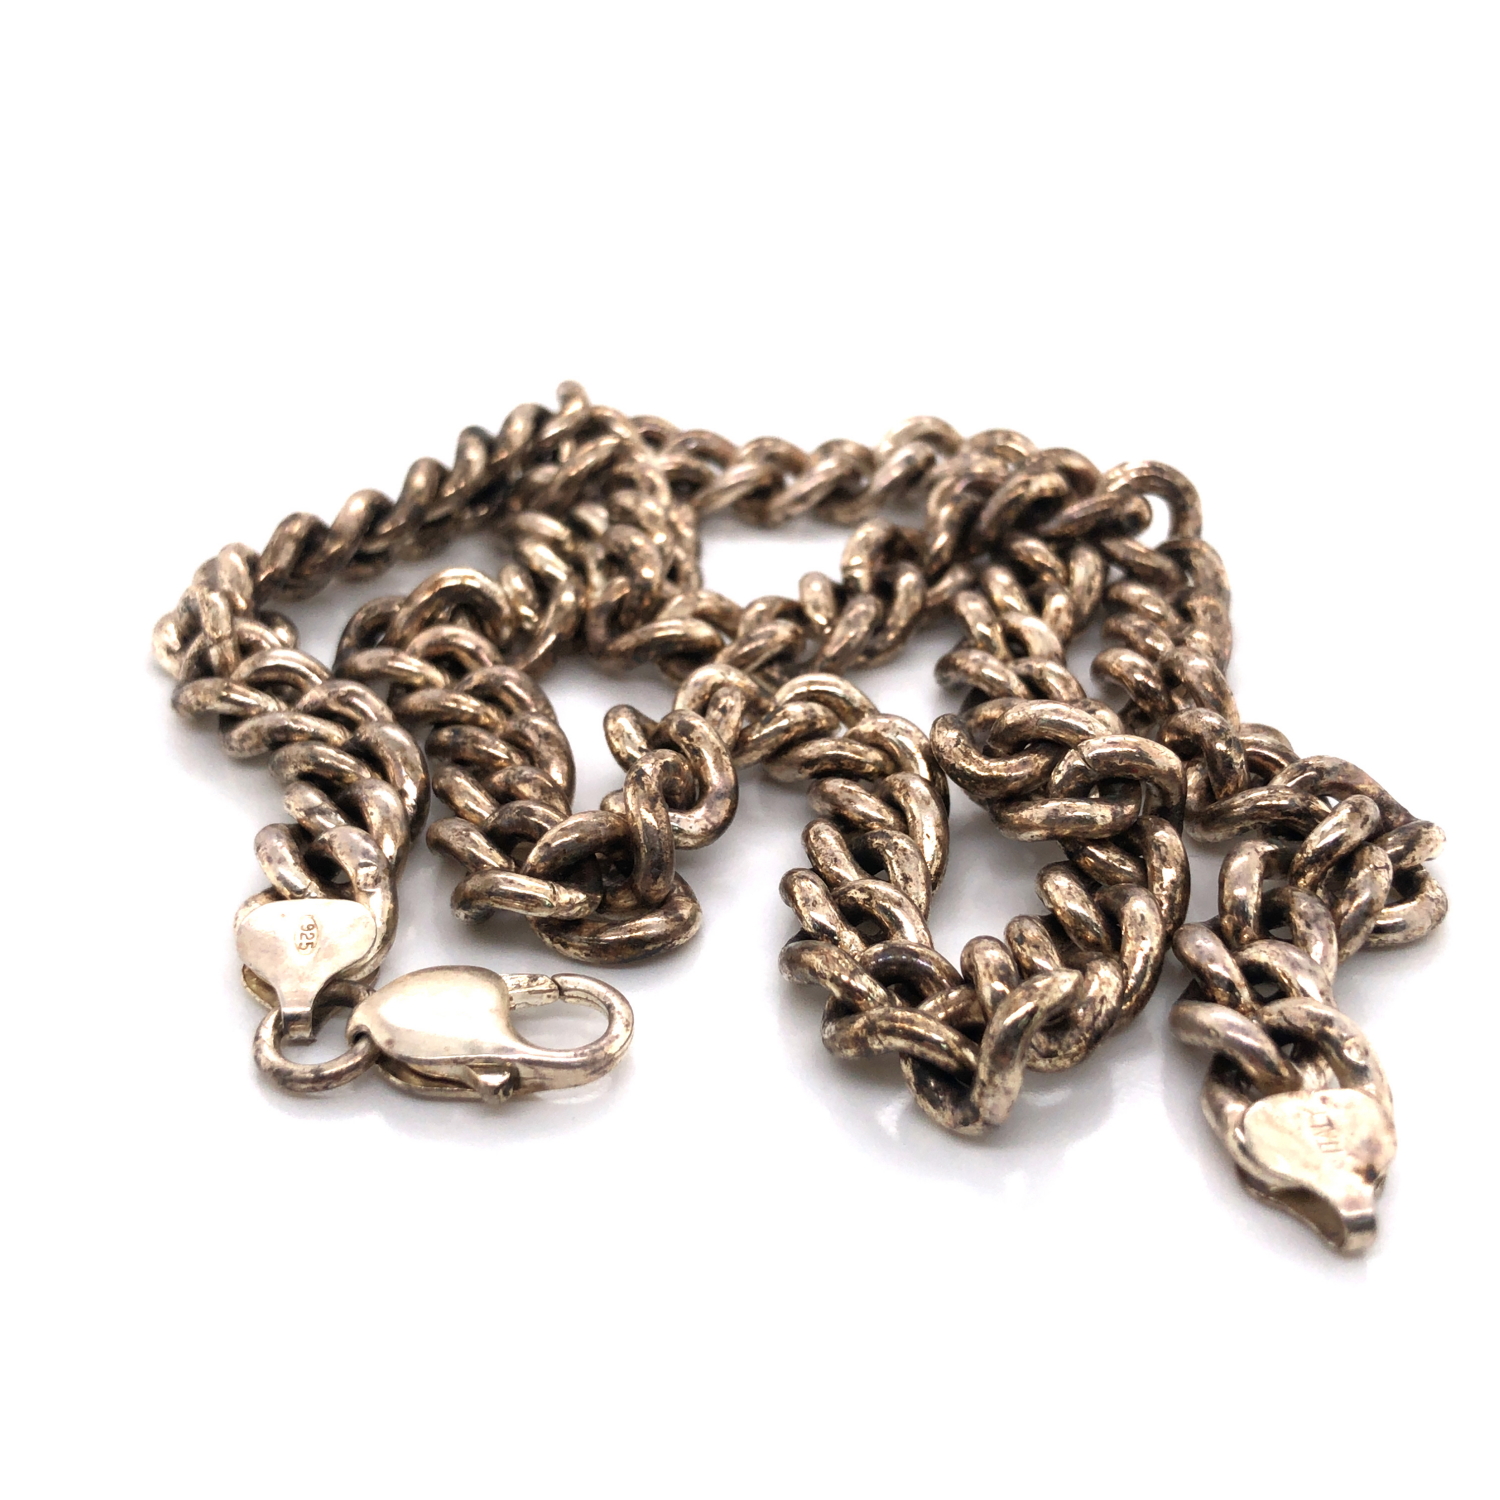 A HALLMARKED SILVER HEAVY CURB CHAIN. LENGTH 56cms, WEIGHT 113.55grms. - Image 2 of 3